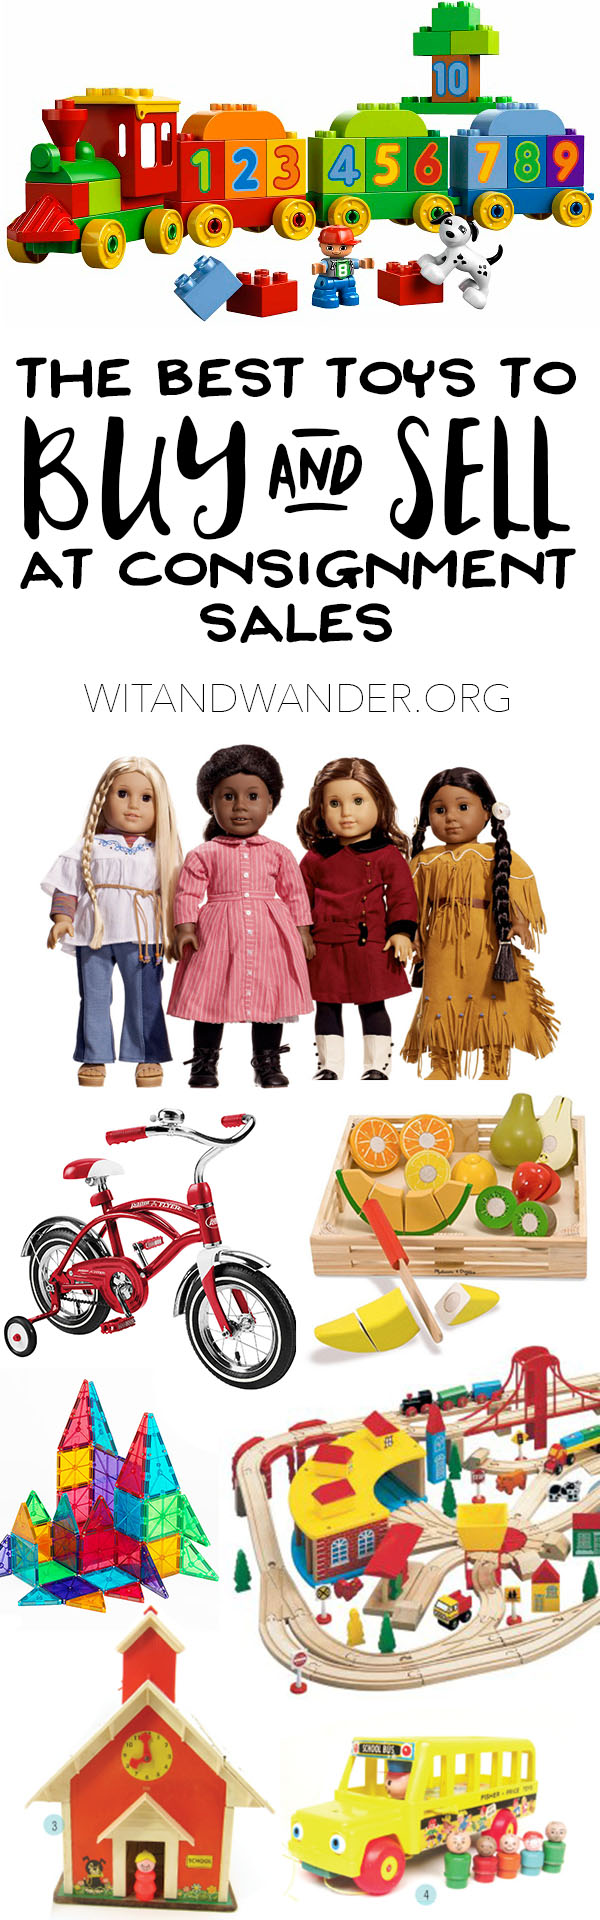 The Best Toys to Buy and Sell at Consignment Sales | Wit & Wander